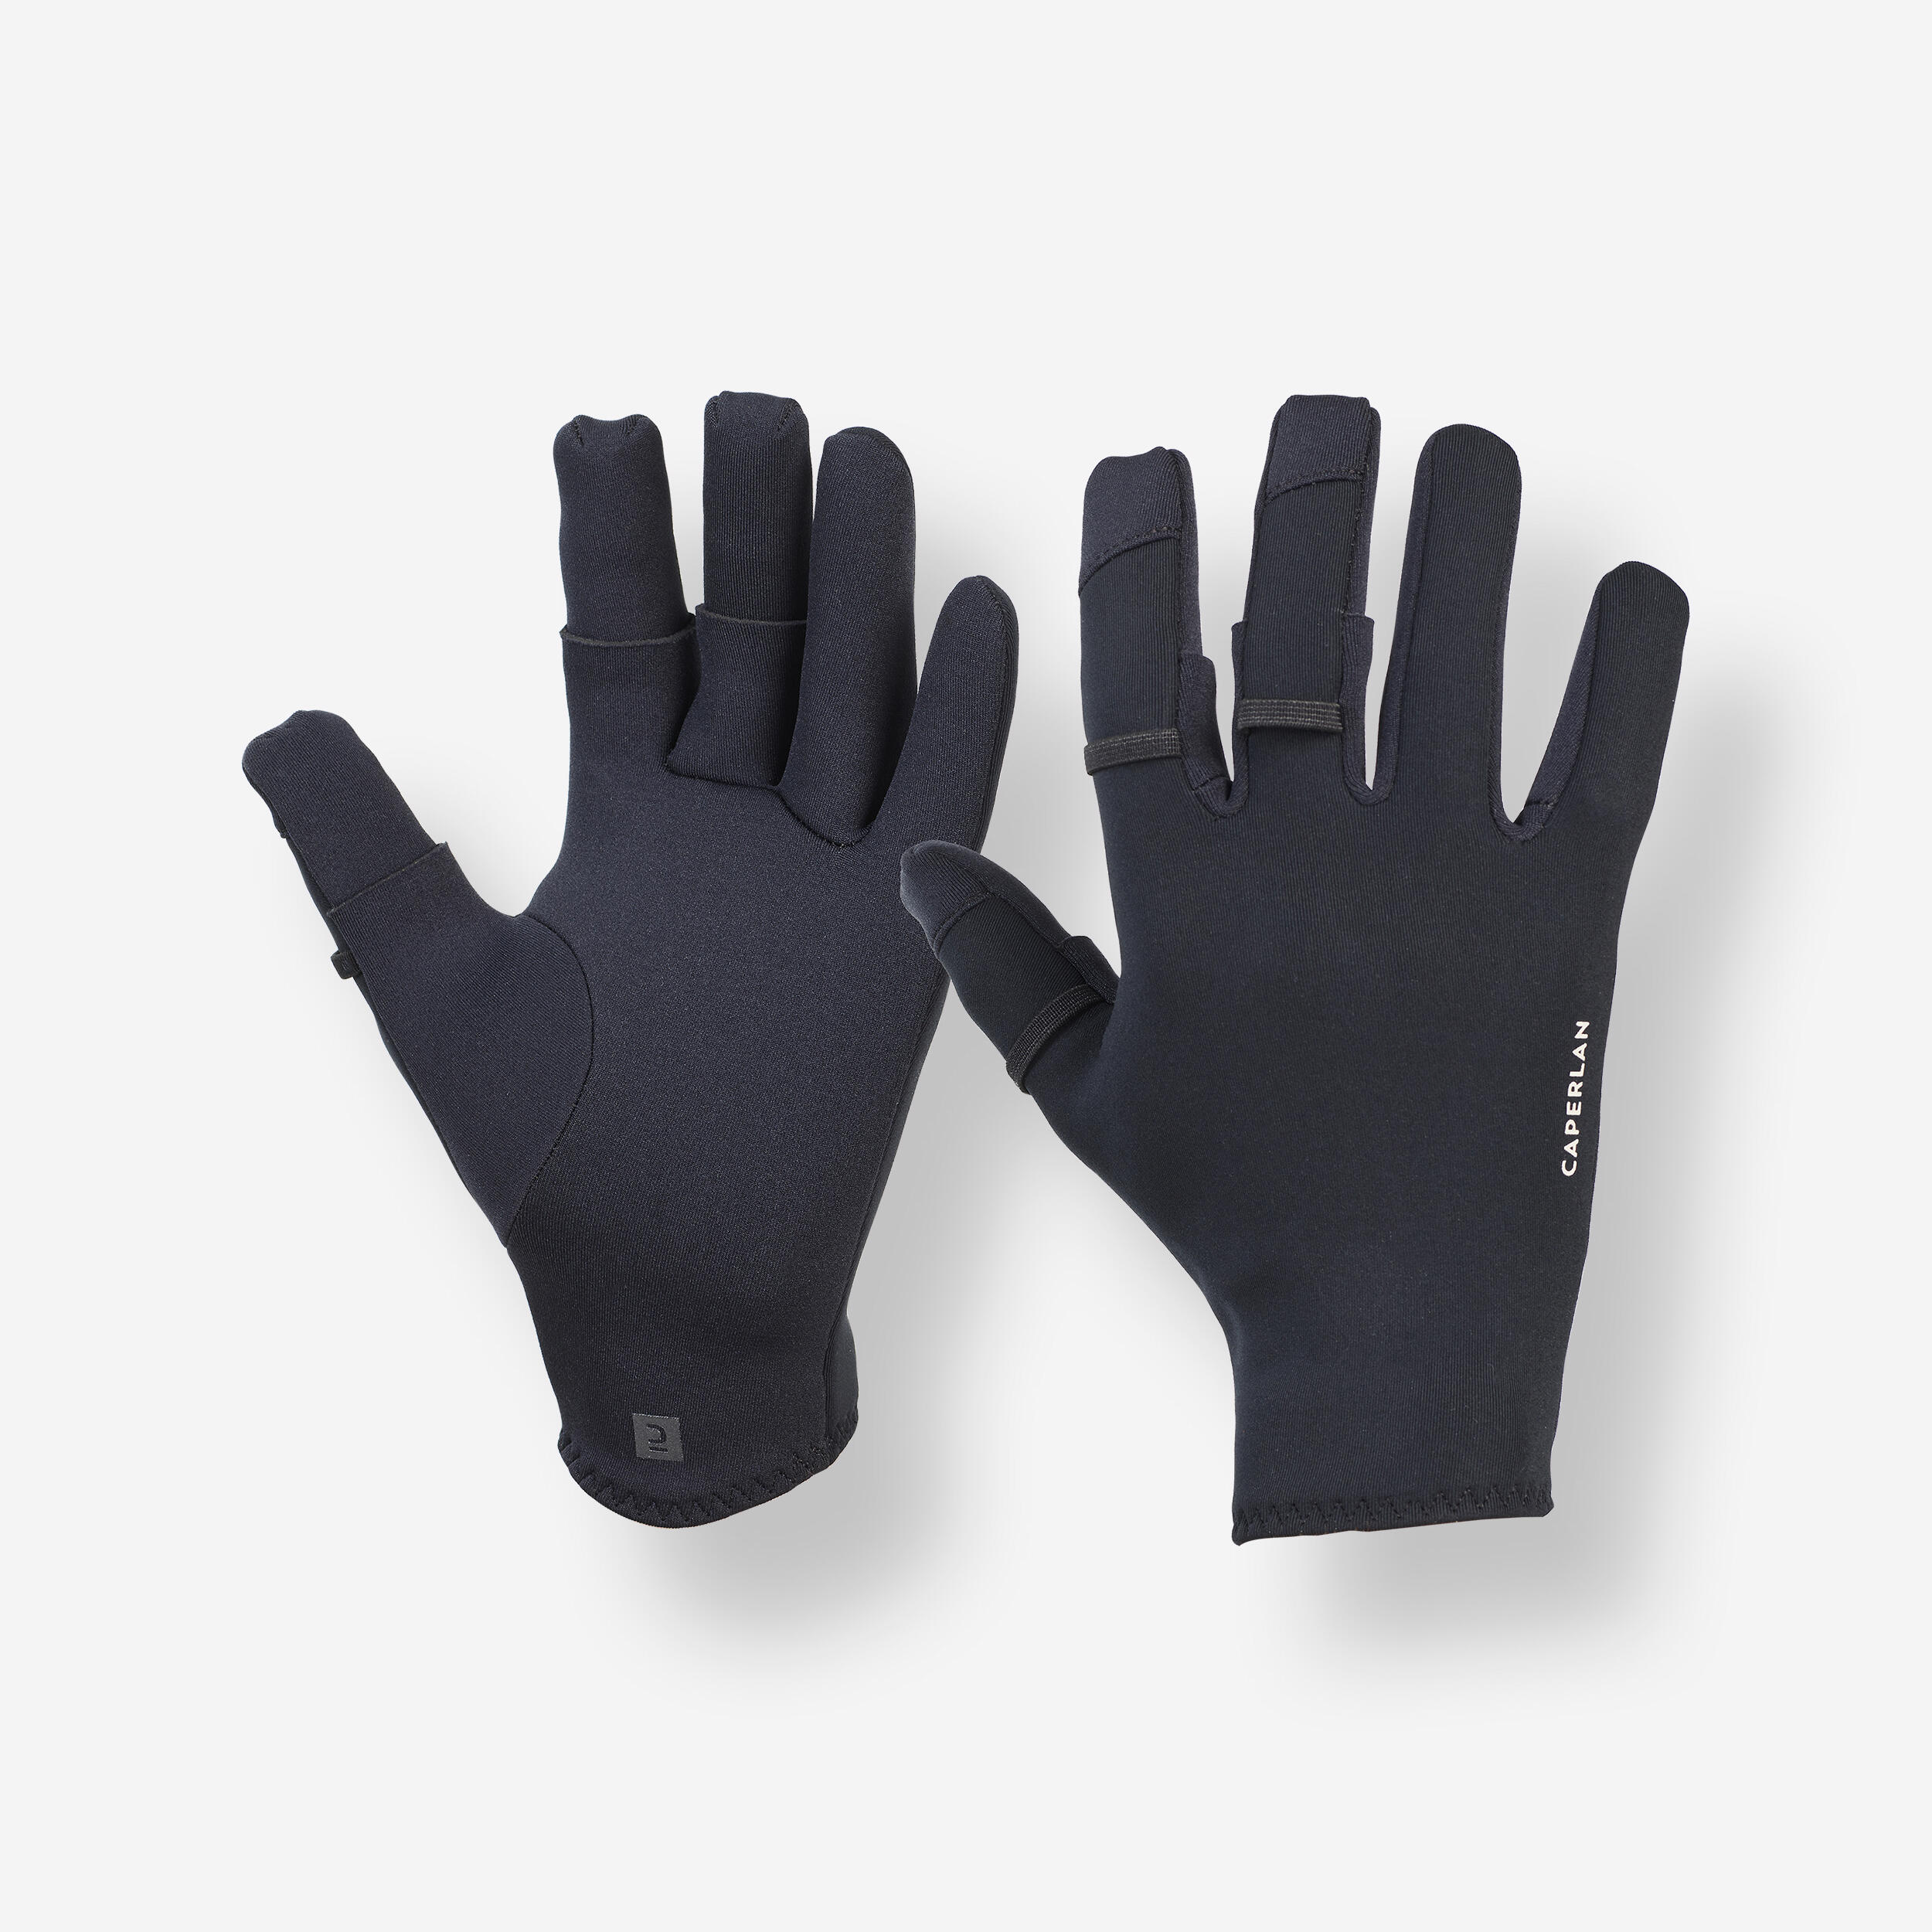 Fishing 1 mm neoprene gloves 500 thermo with 3 opening fingers black  CAPERLAN